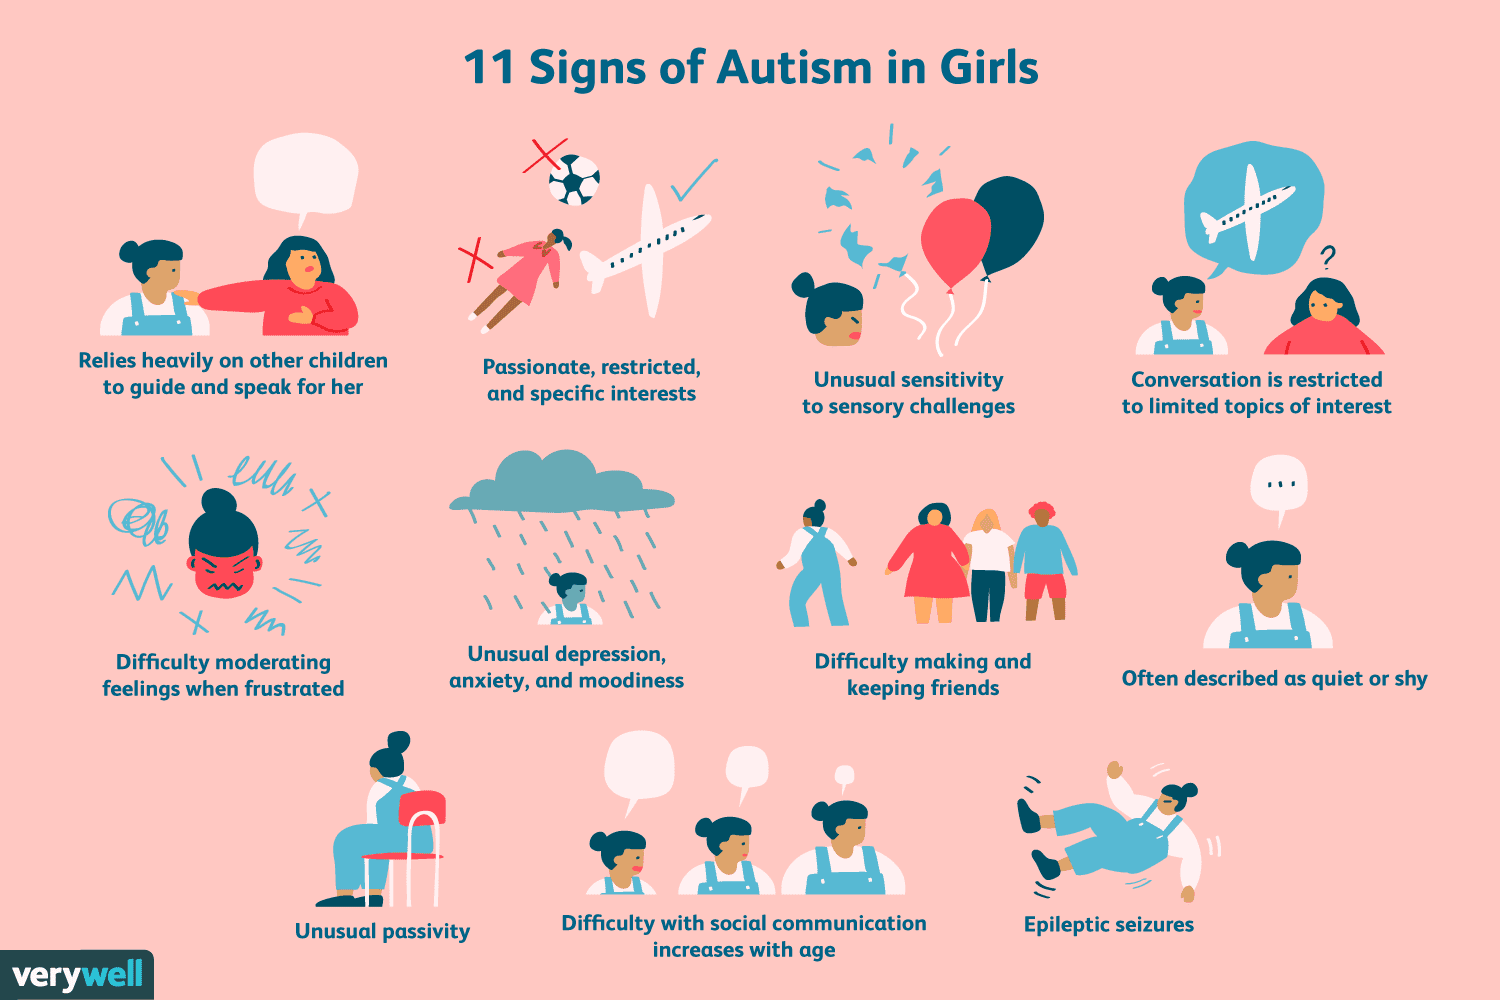 Signs and Symptoms of Autism in Girls